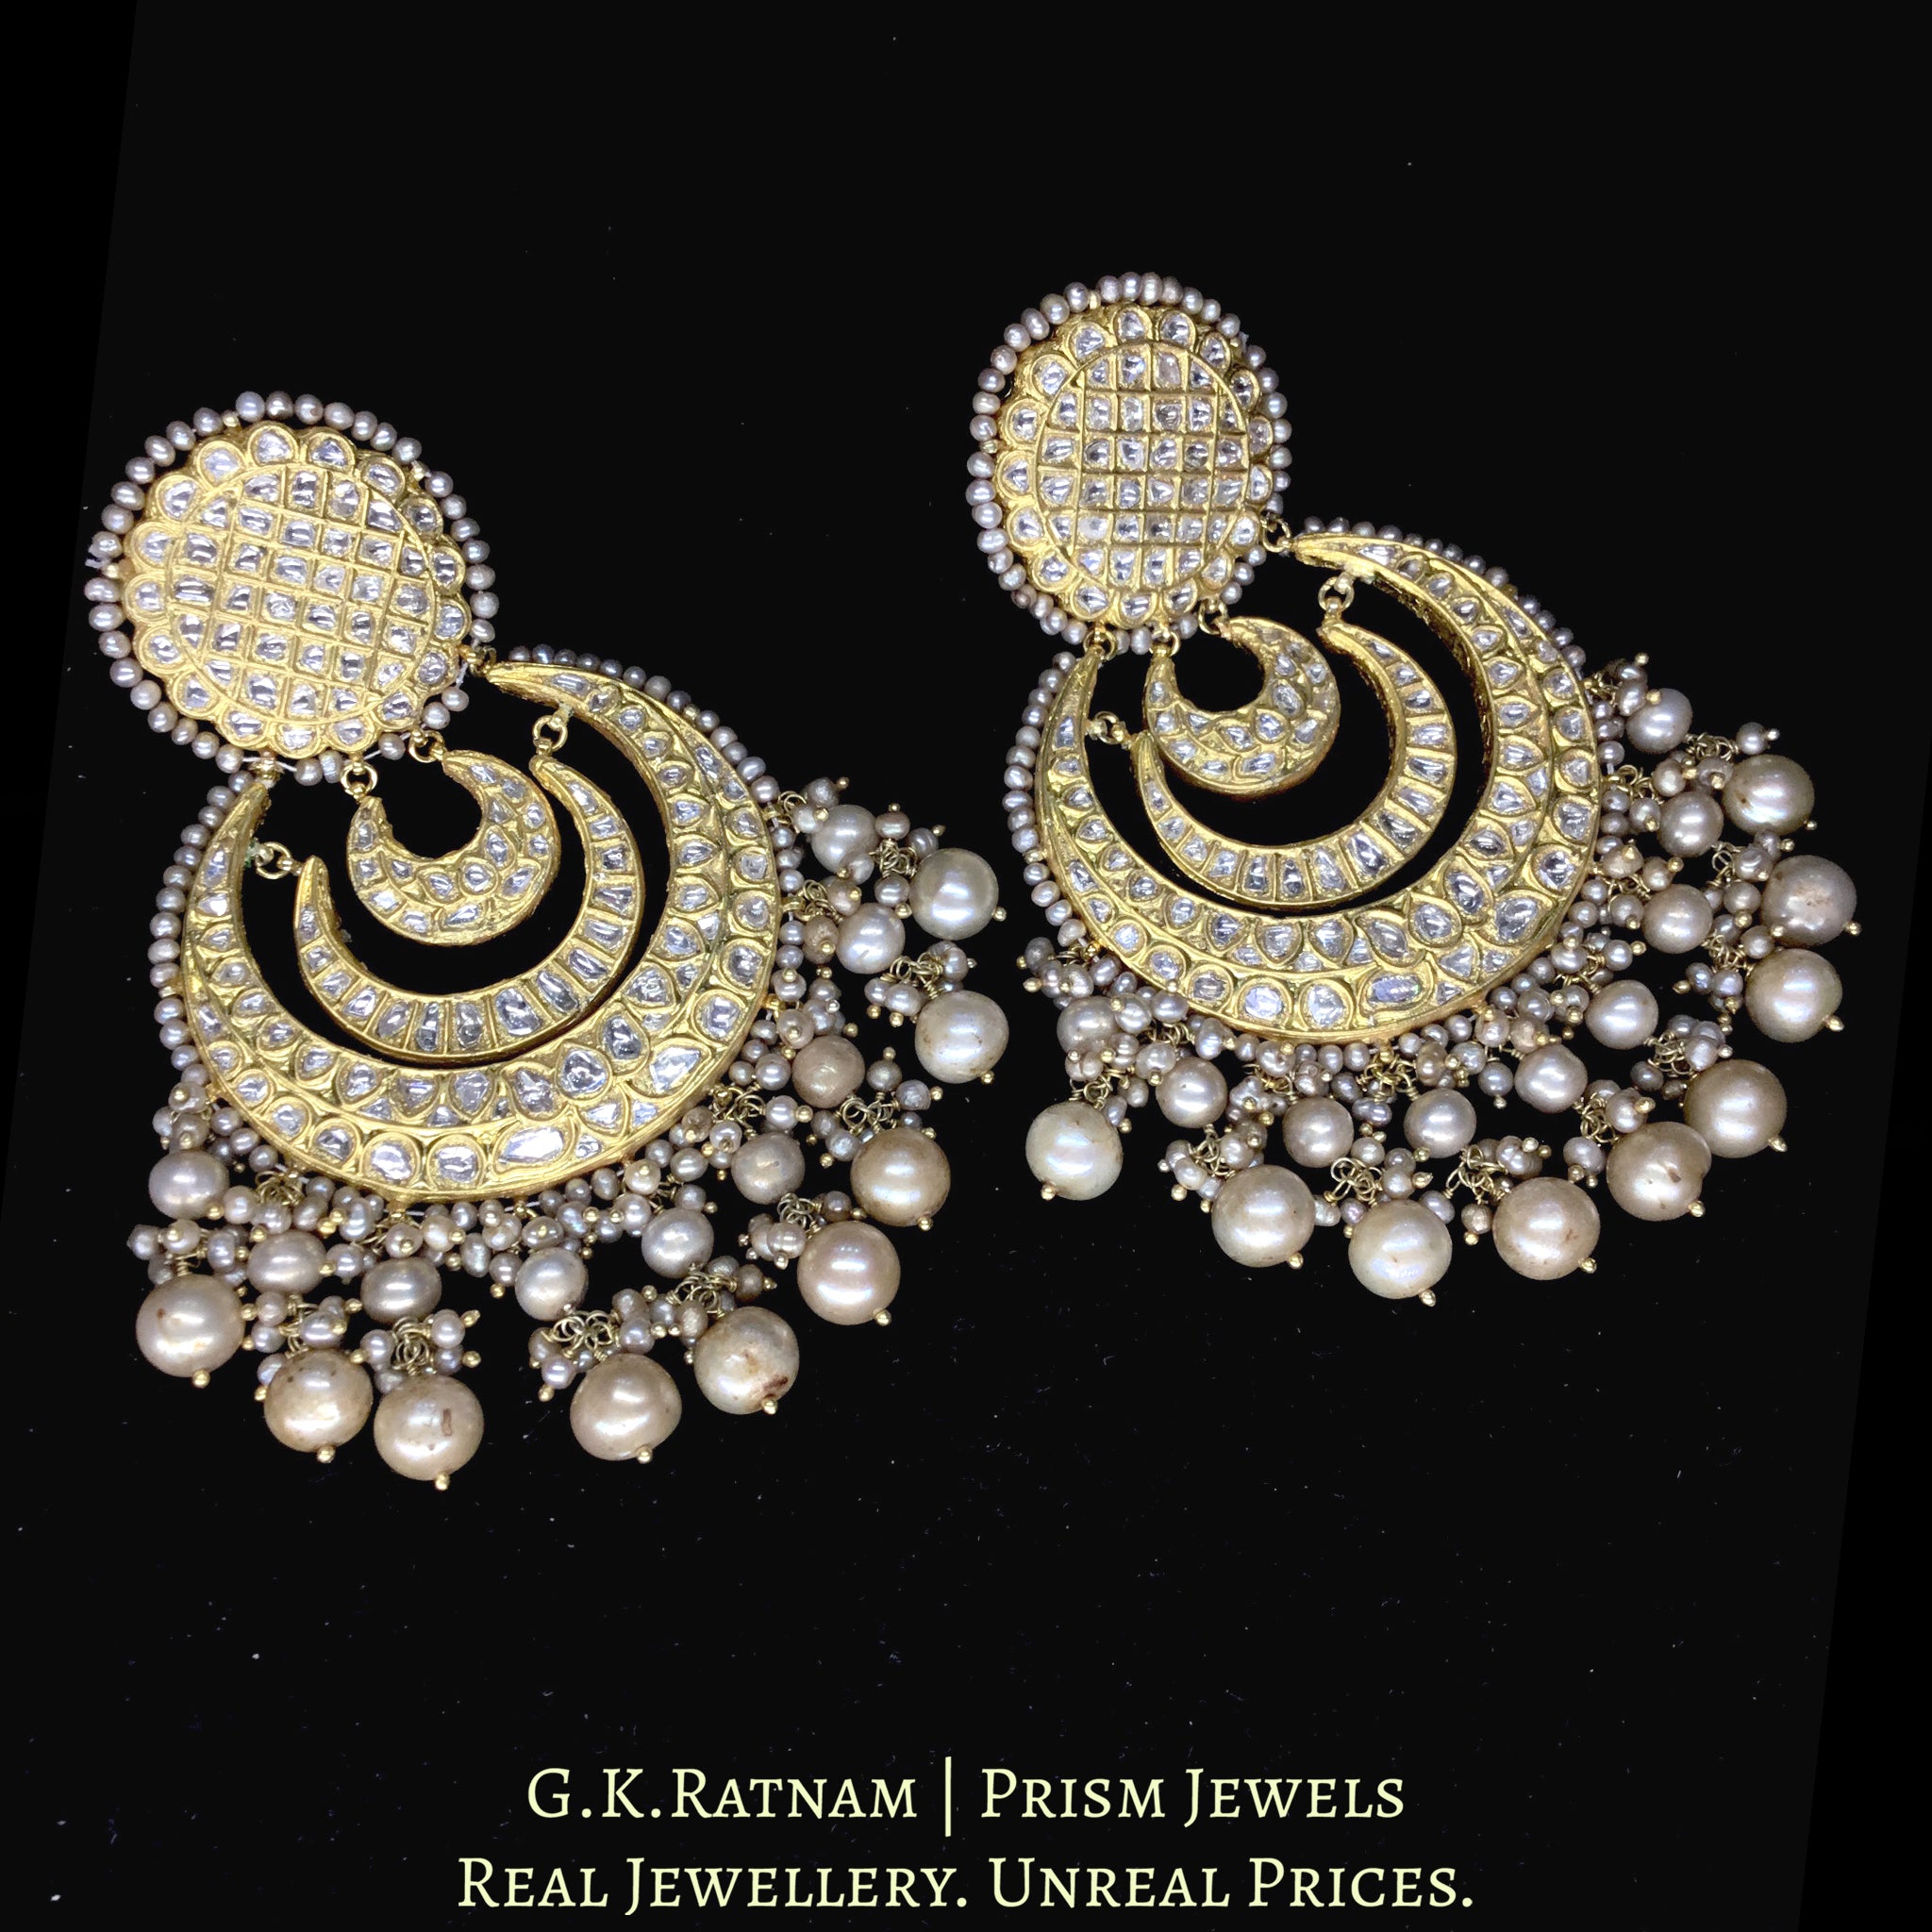 Chandbali Earring Designs that Will Blow Your Mind - The Caratlane